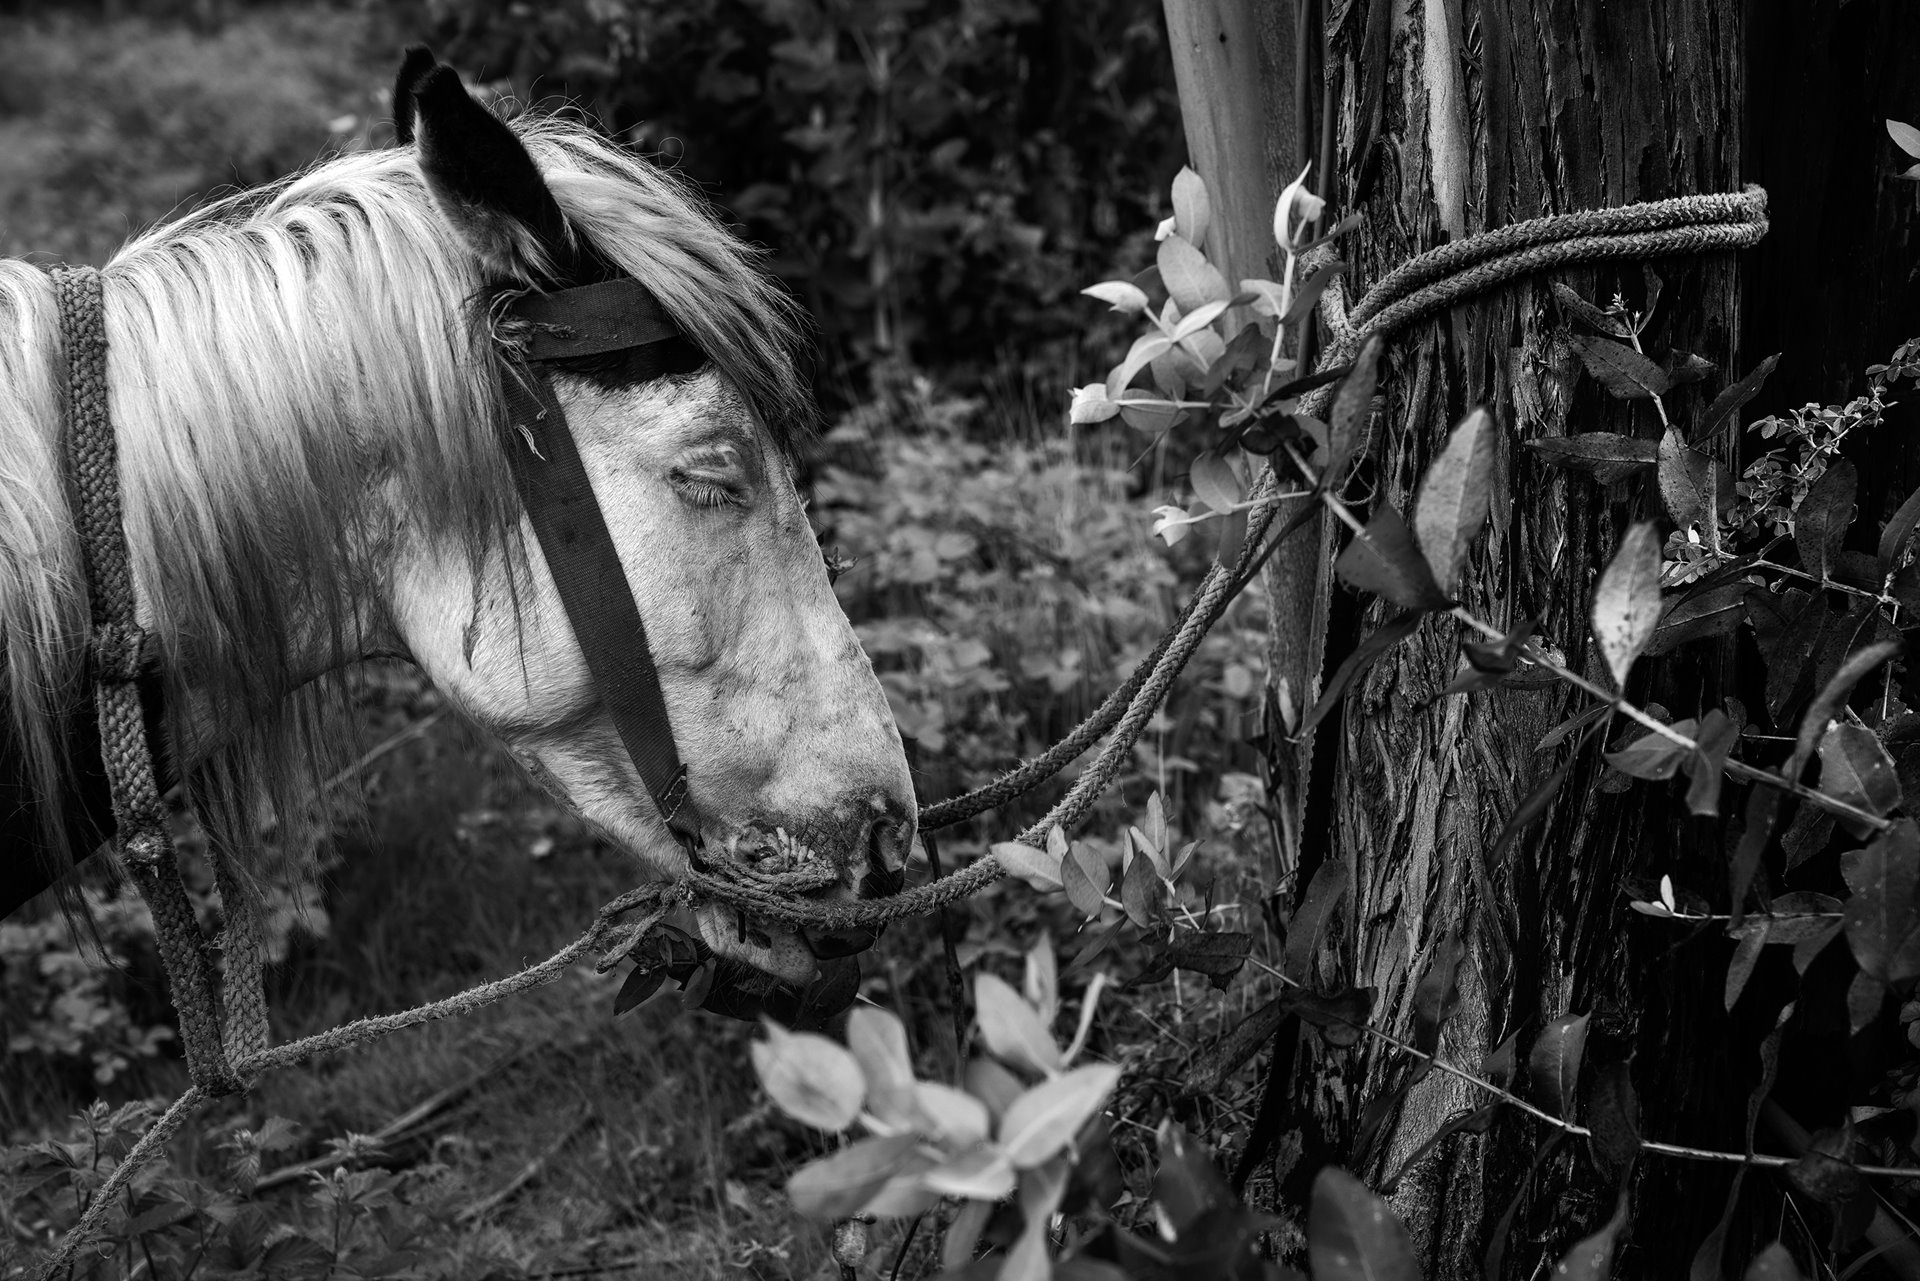 A horse rests after a procession in Ercilla, Araucanía, Chile, on the first anniversary of the death of Camilo Catrillanca. A prominent Mapuche weichafe (community leader and defender of territorial rights), Catrillanca was shot from behind by members of a Comando Jungla (Jungle Commando) police unit. Four officers were arrested in connection with the incident.